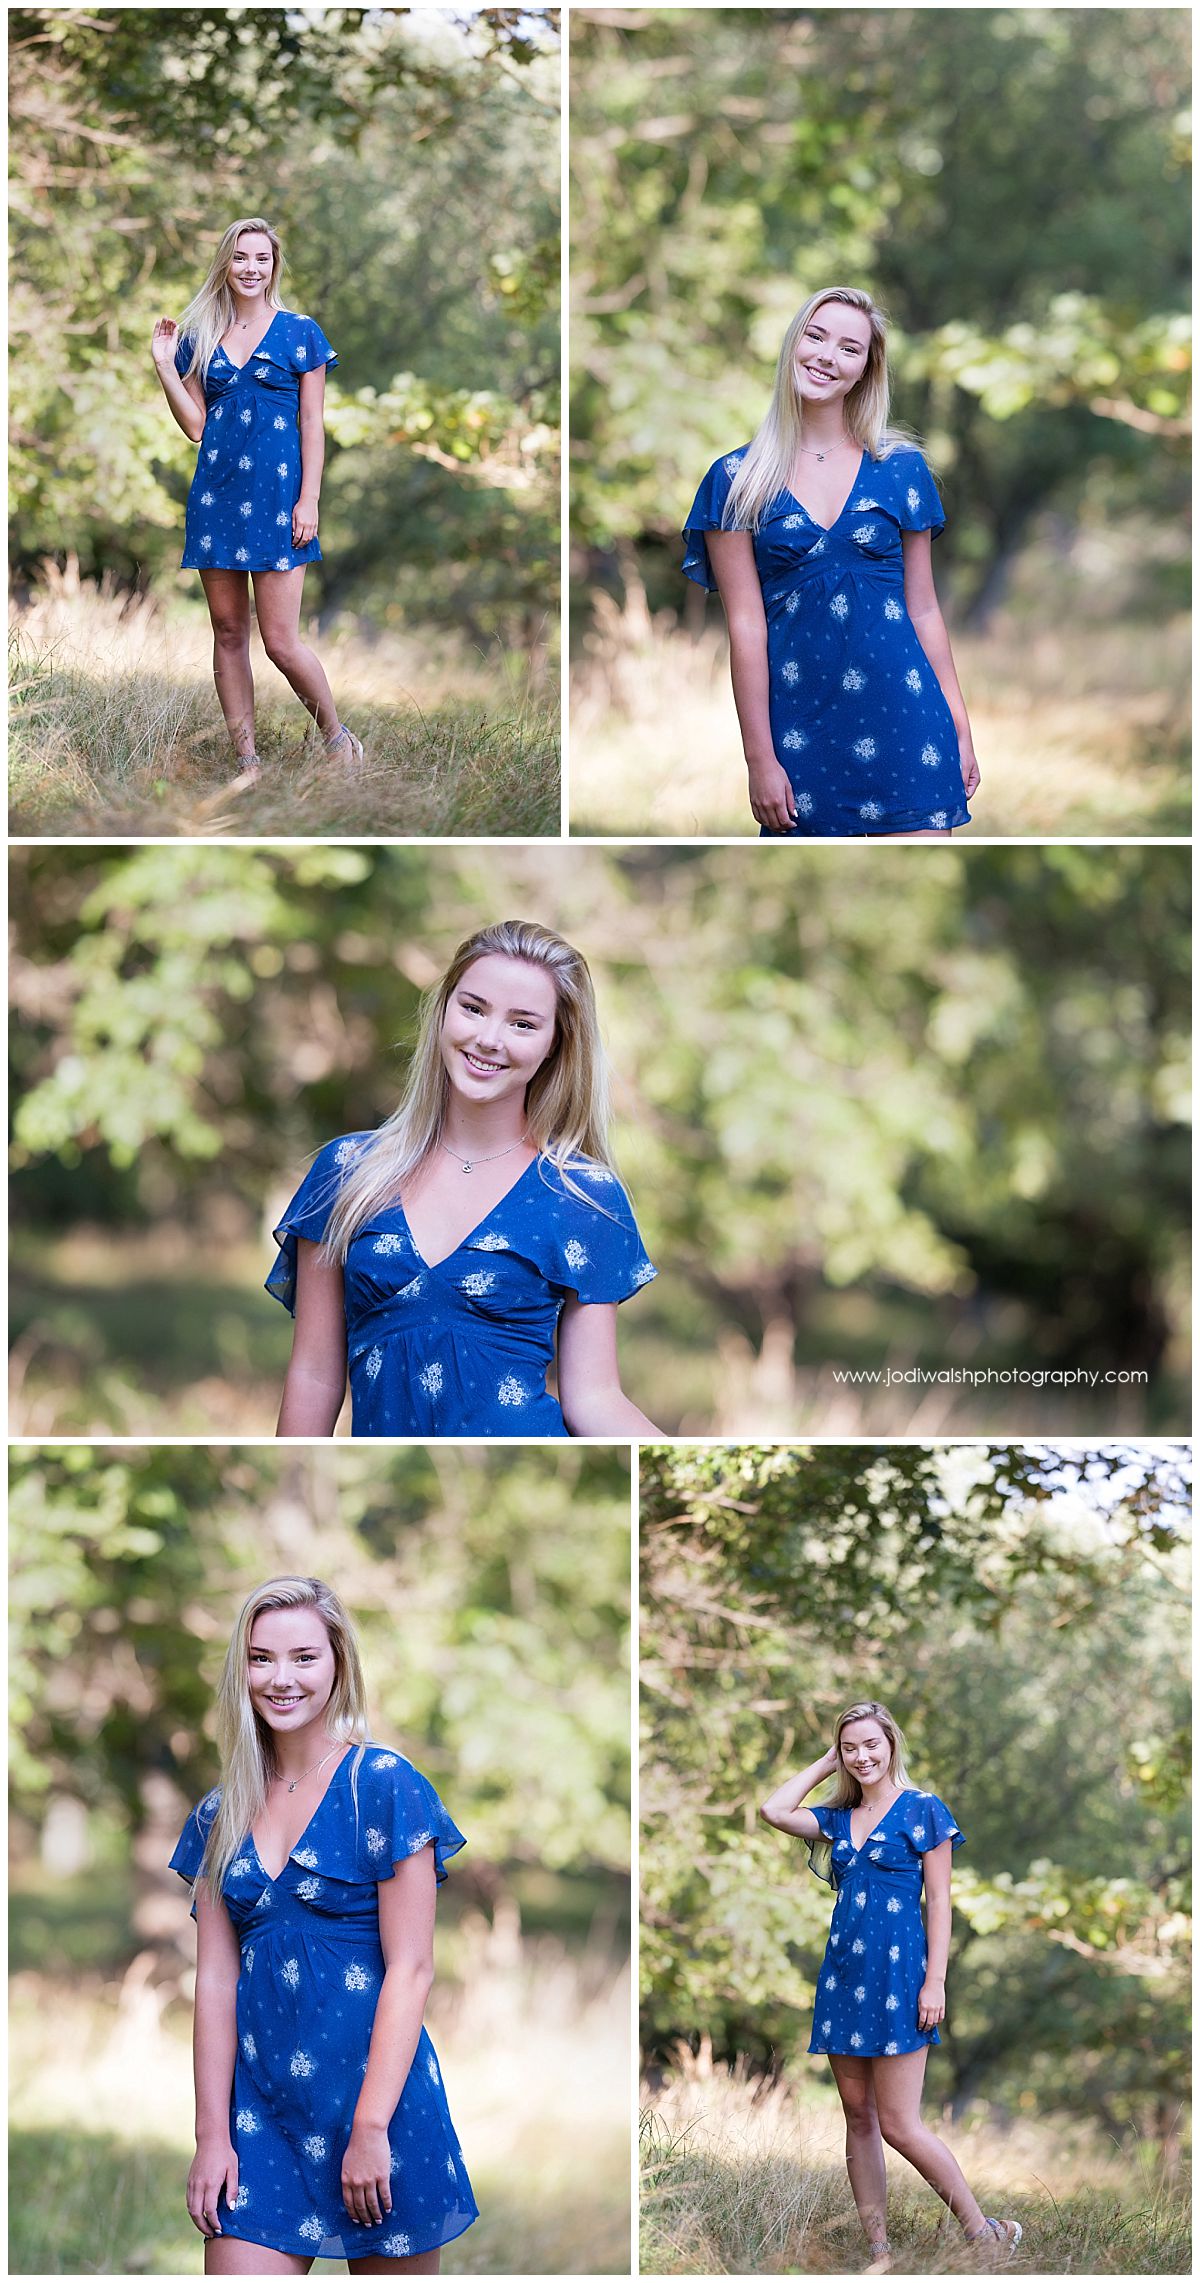 collage of images from a senior portrait session with Jodi Walsh Photography. The senior girl is blonde and wearing a blue dress with white flowers on it. She's standing in a wooded area in North Park.